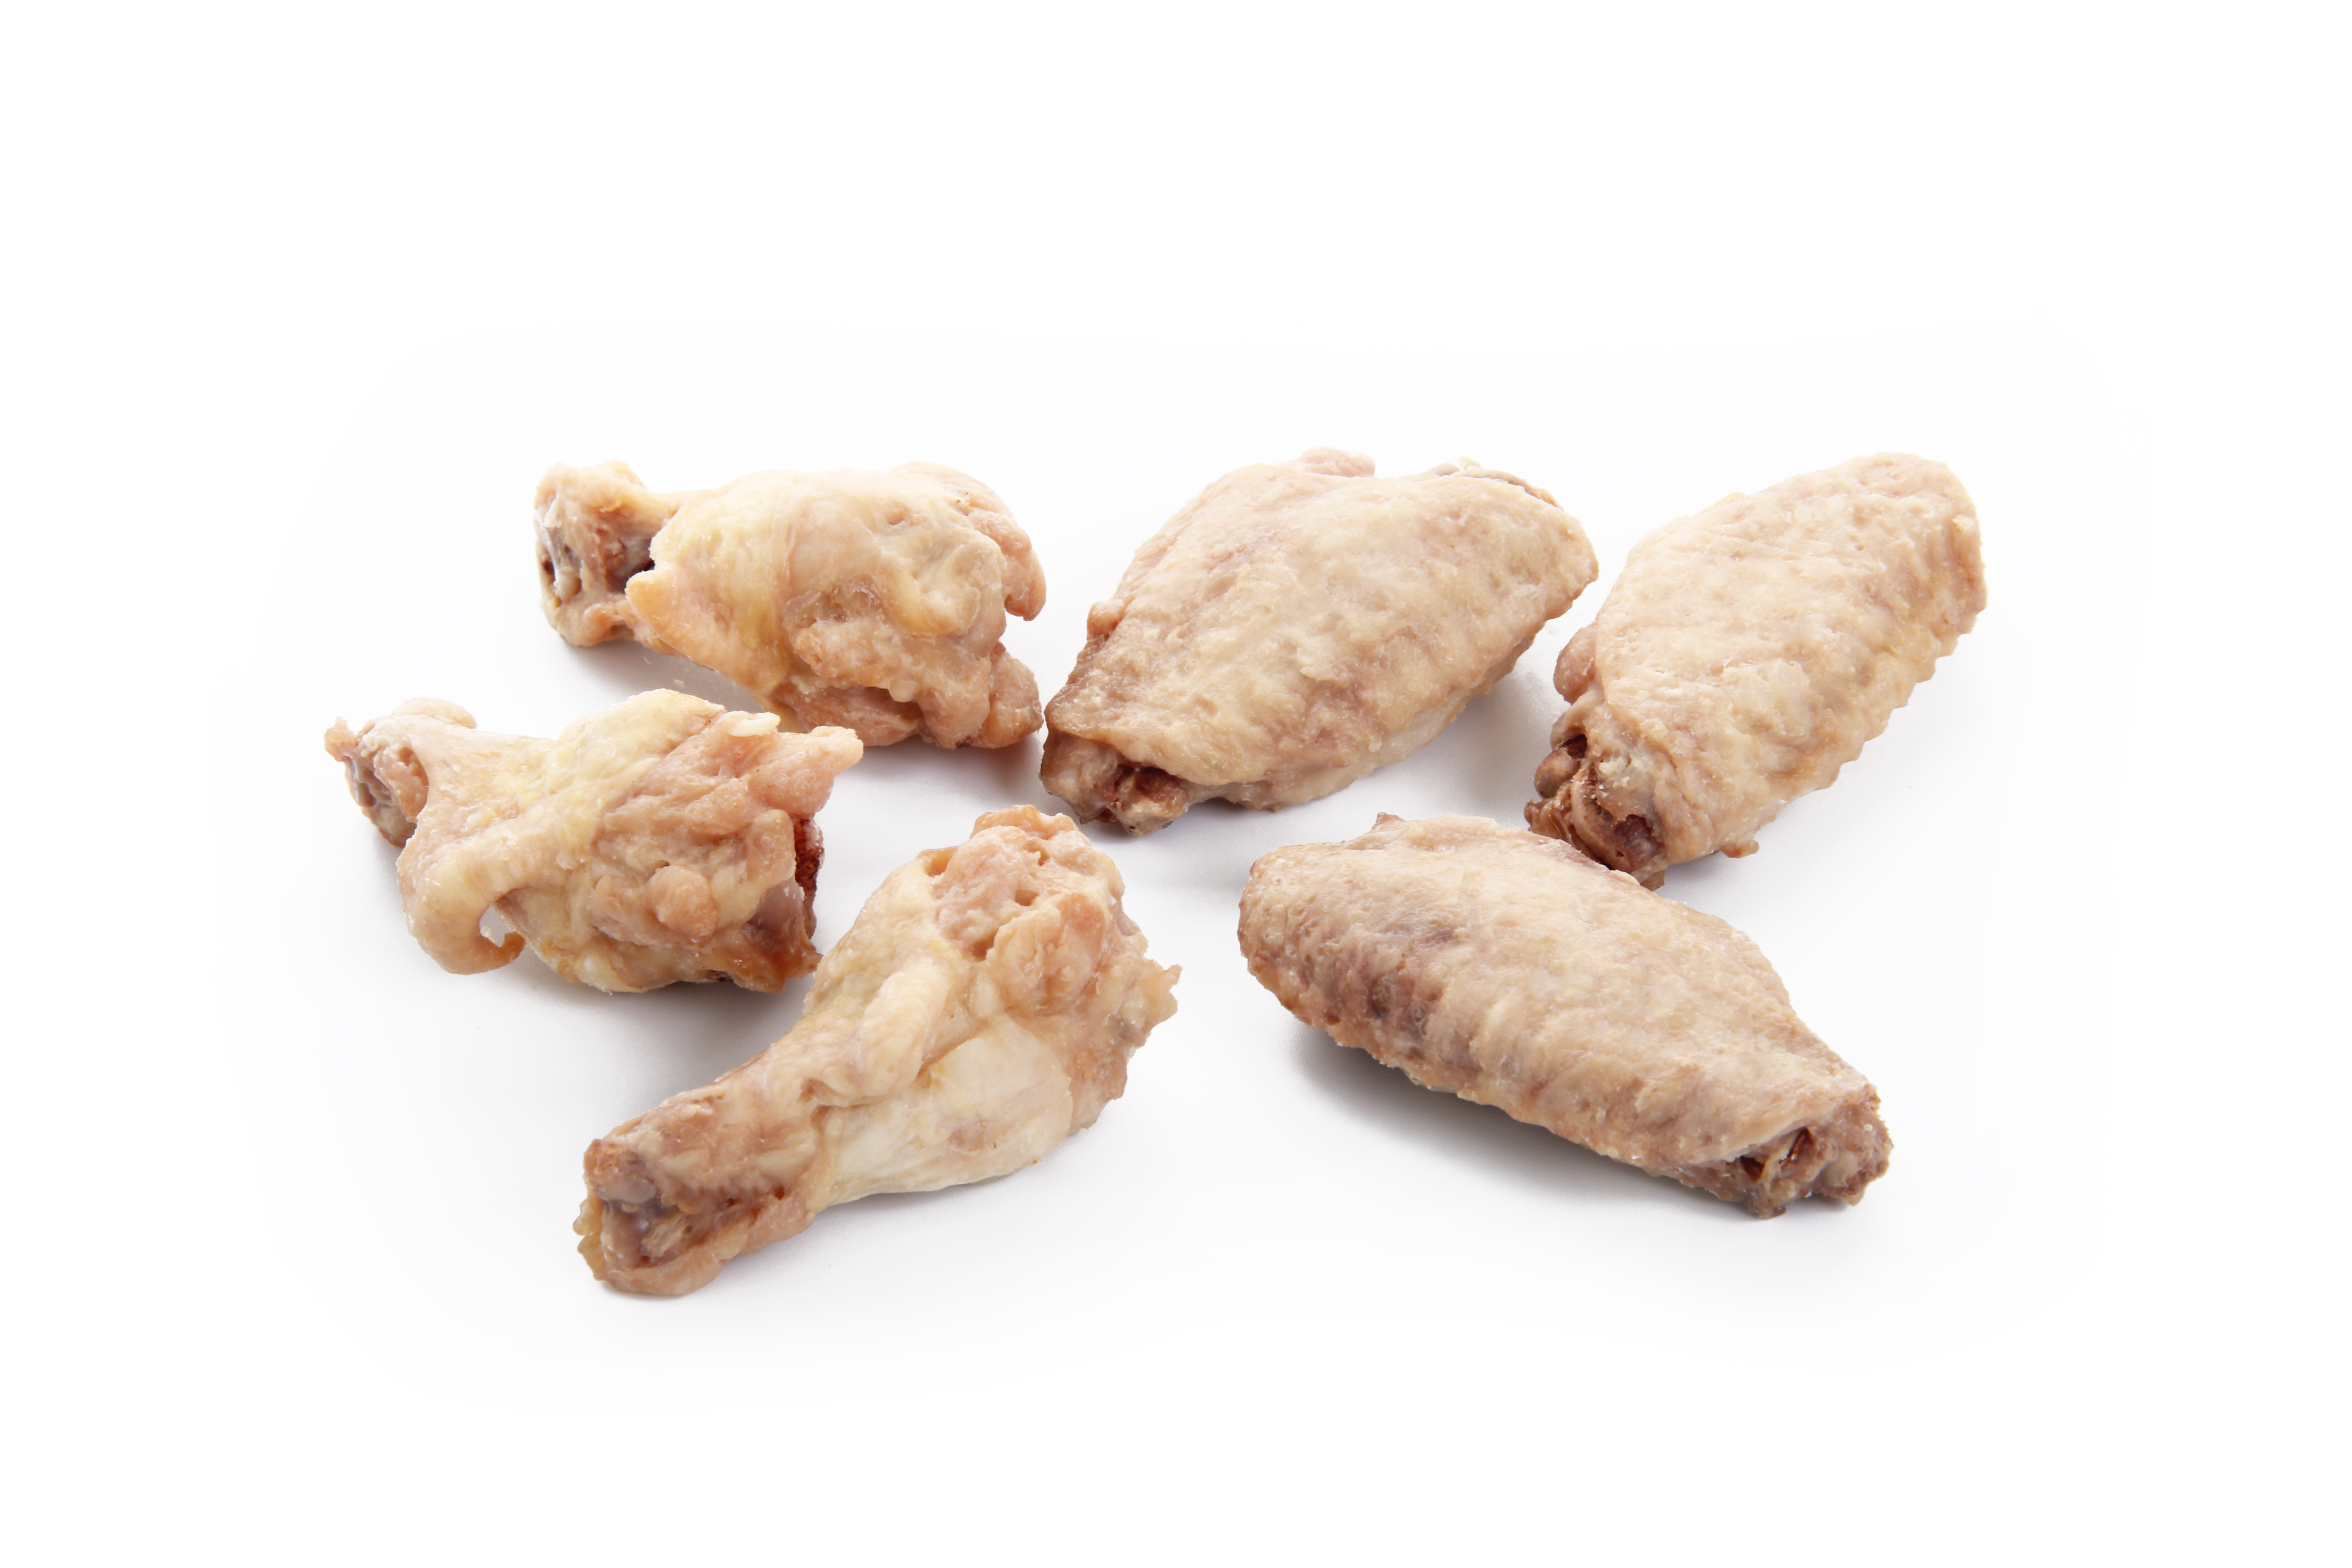 Roasted chicken wing part mix, plain